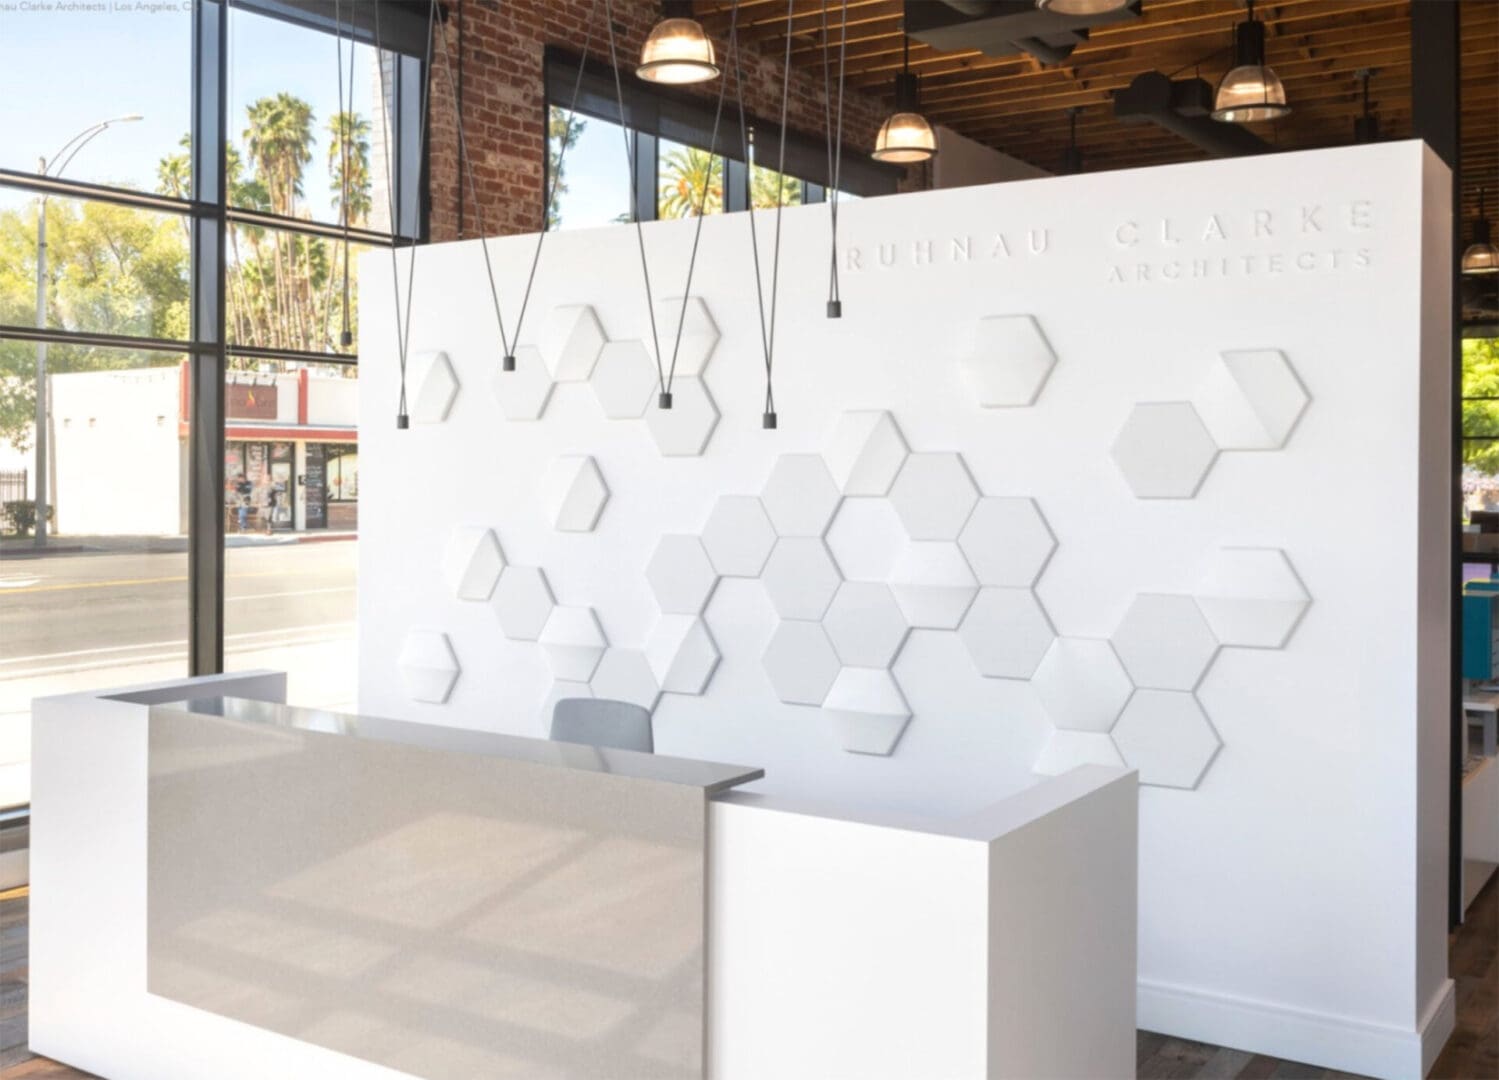 A white wall with a large hexagonal pattern.